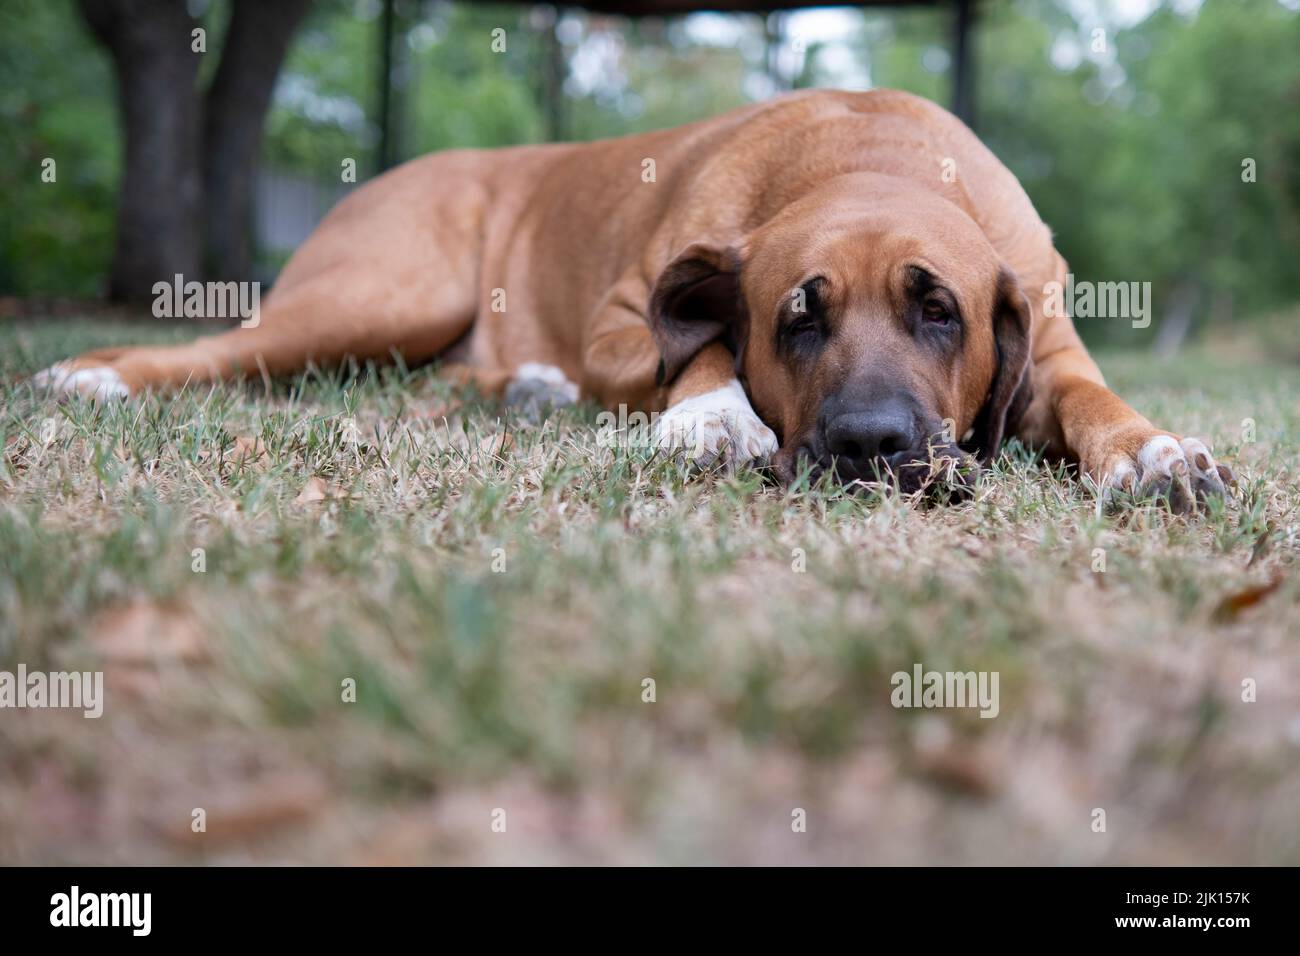 Broholmer dog Dane breed lying on the grass and looking into camera, Italy, Europe Stock Photo